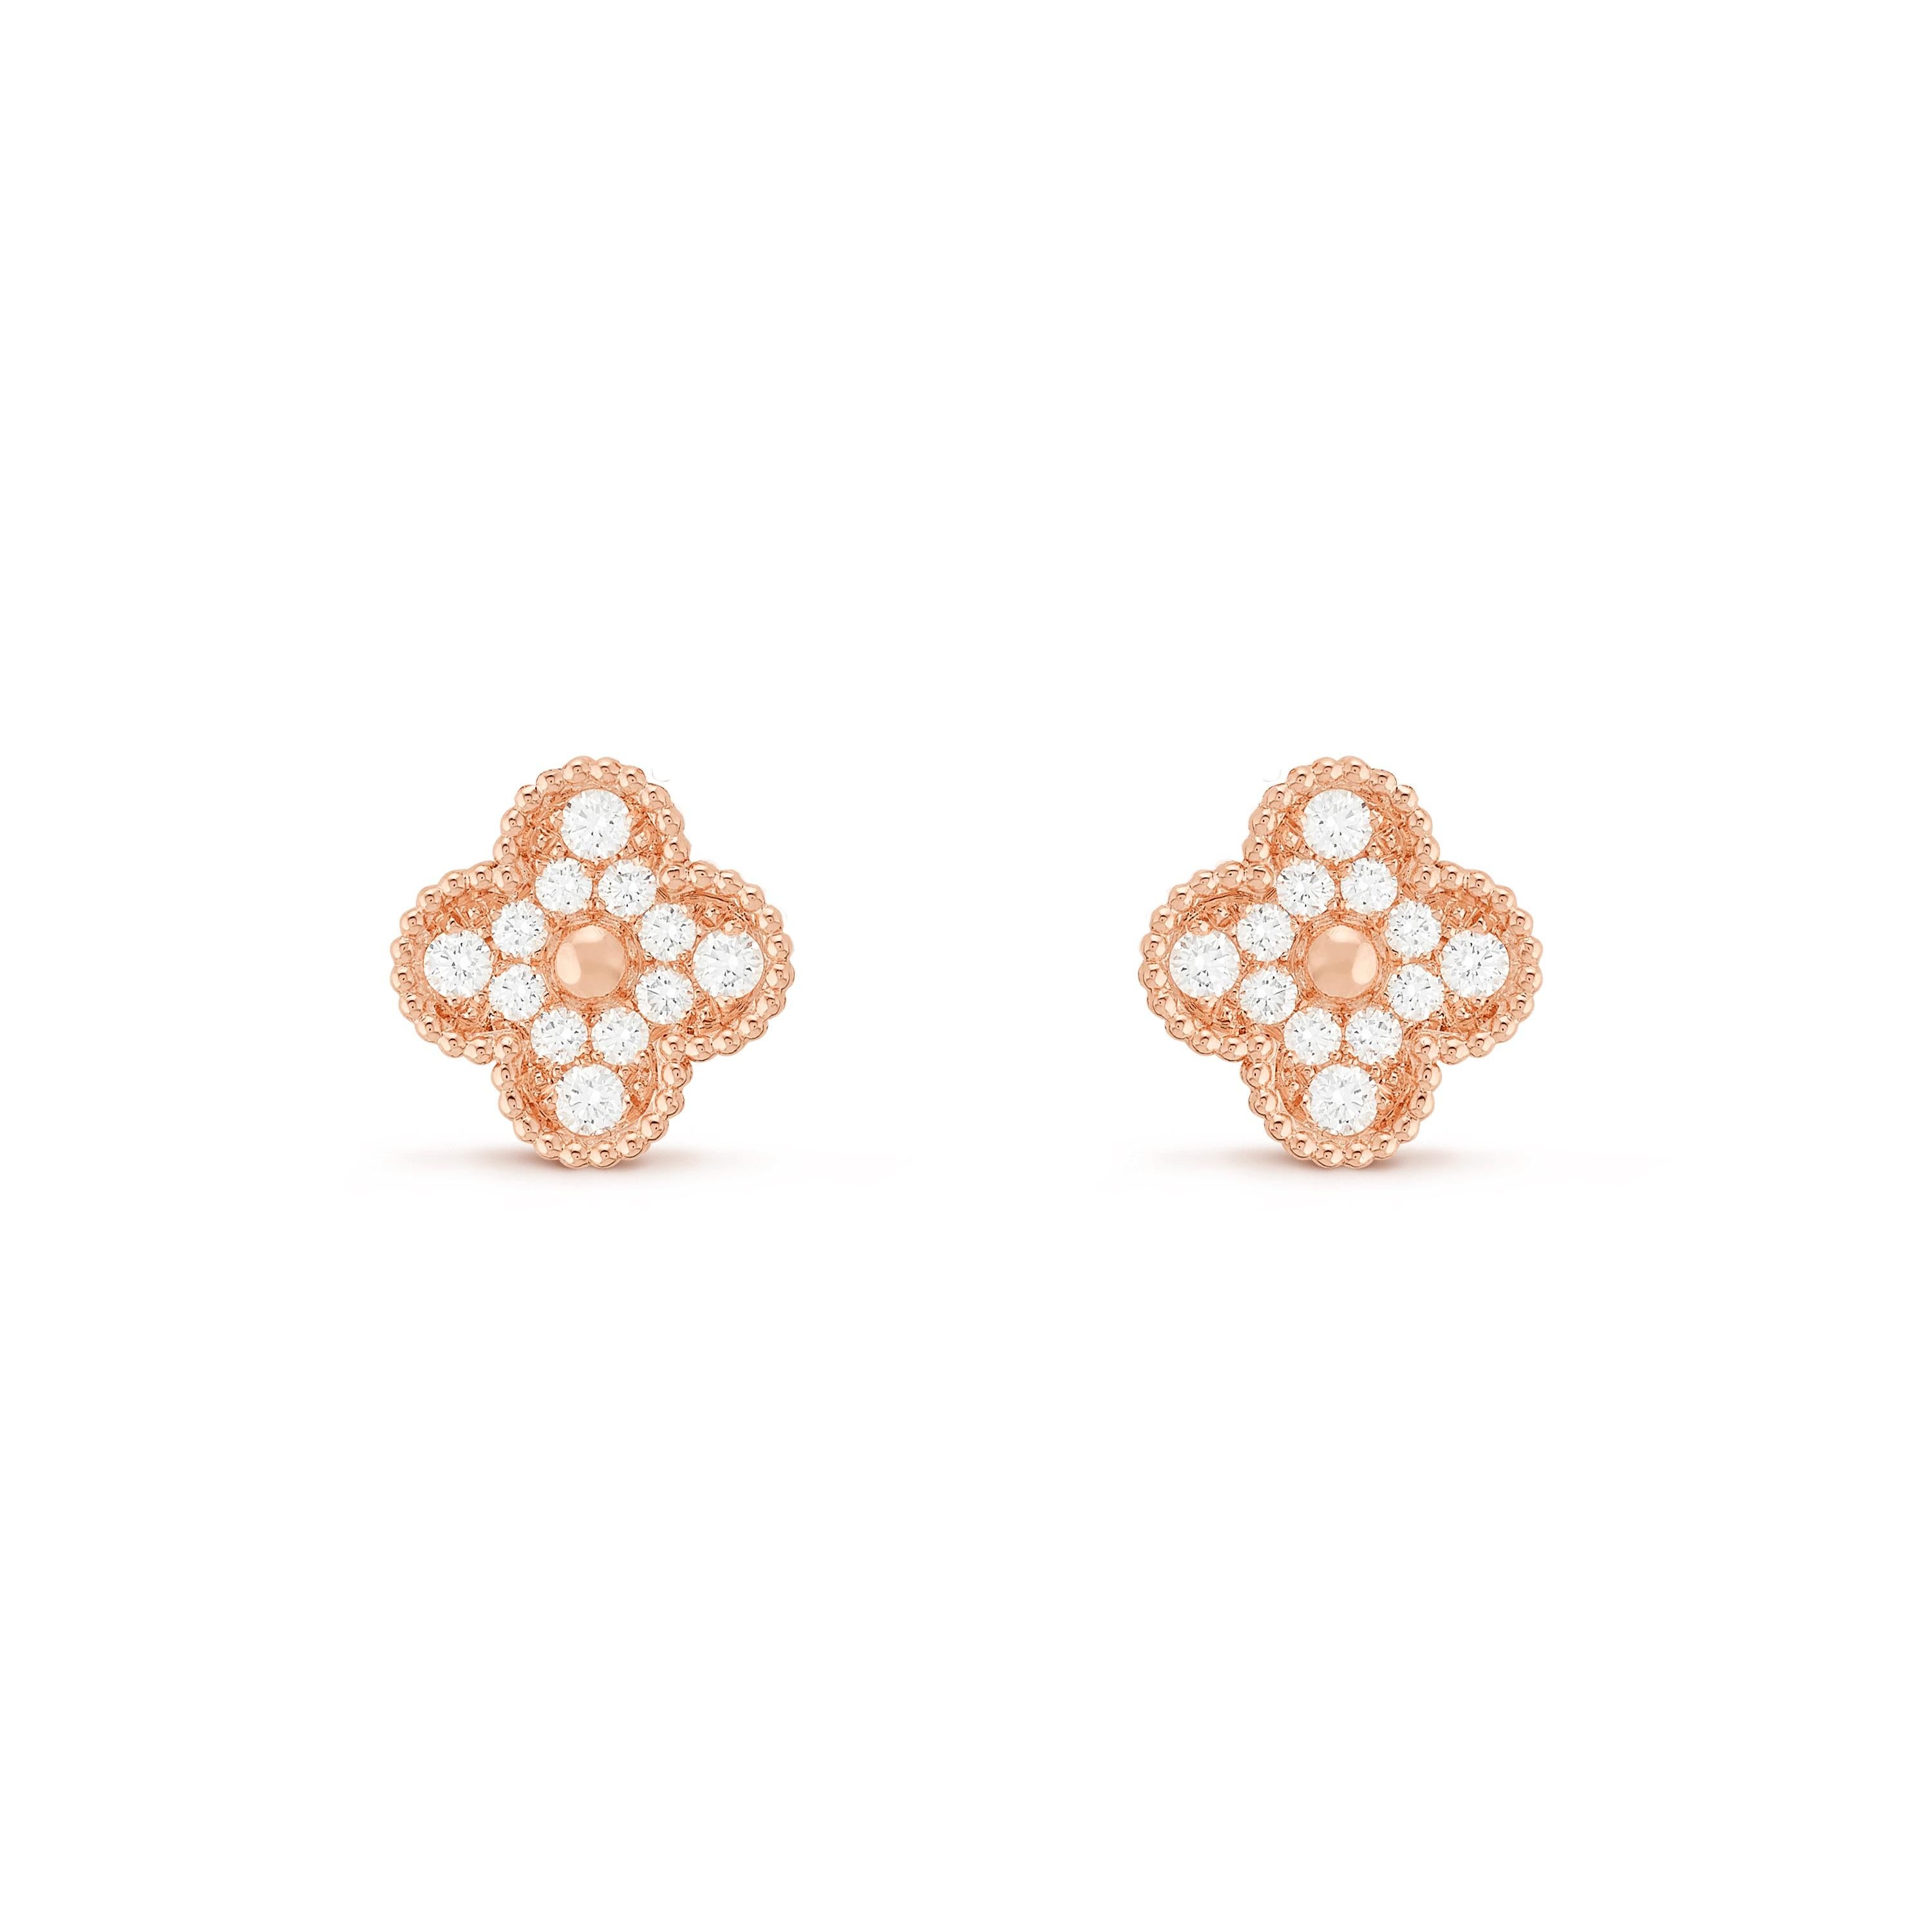 This classic vintage Van Cleef & Arpels earrings are  crafted in 18k rose gold and feature 2lucky clover motifs inlaid withmalachite in round bead settings. Made in France circa 2000 Measurements: 0.59